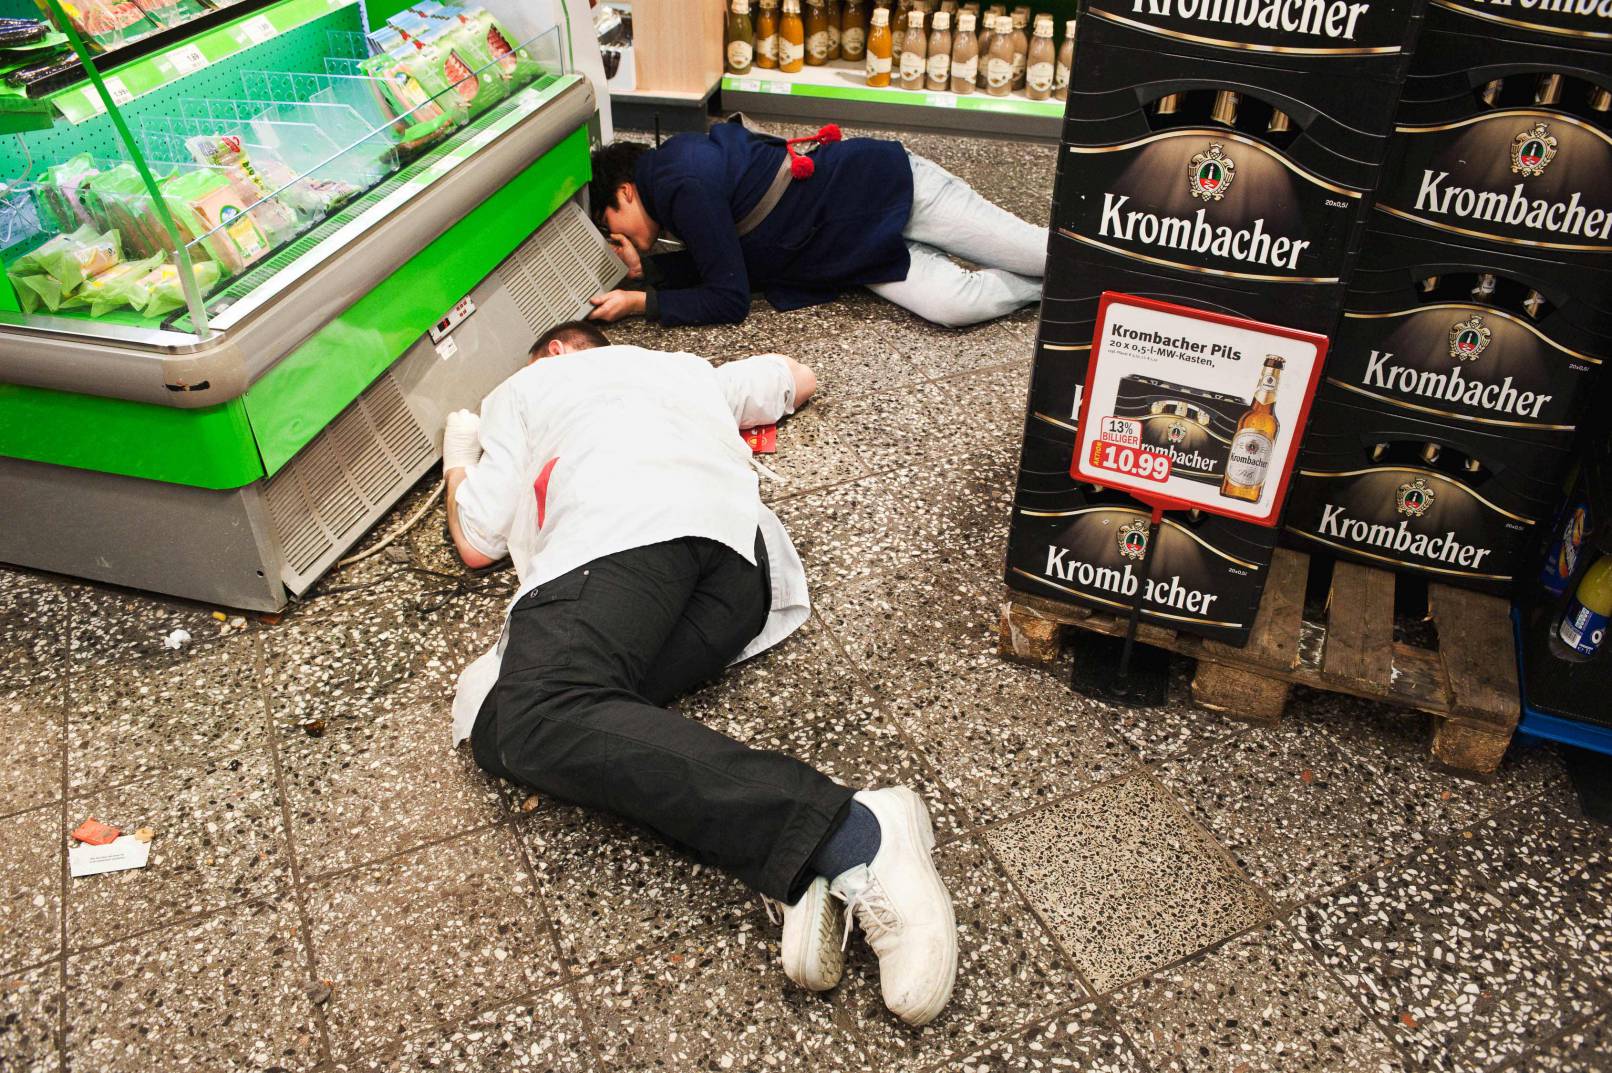 Two person looking for a missing mobile under a shelf in a supermarket, Berlin